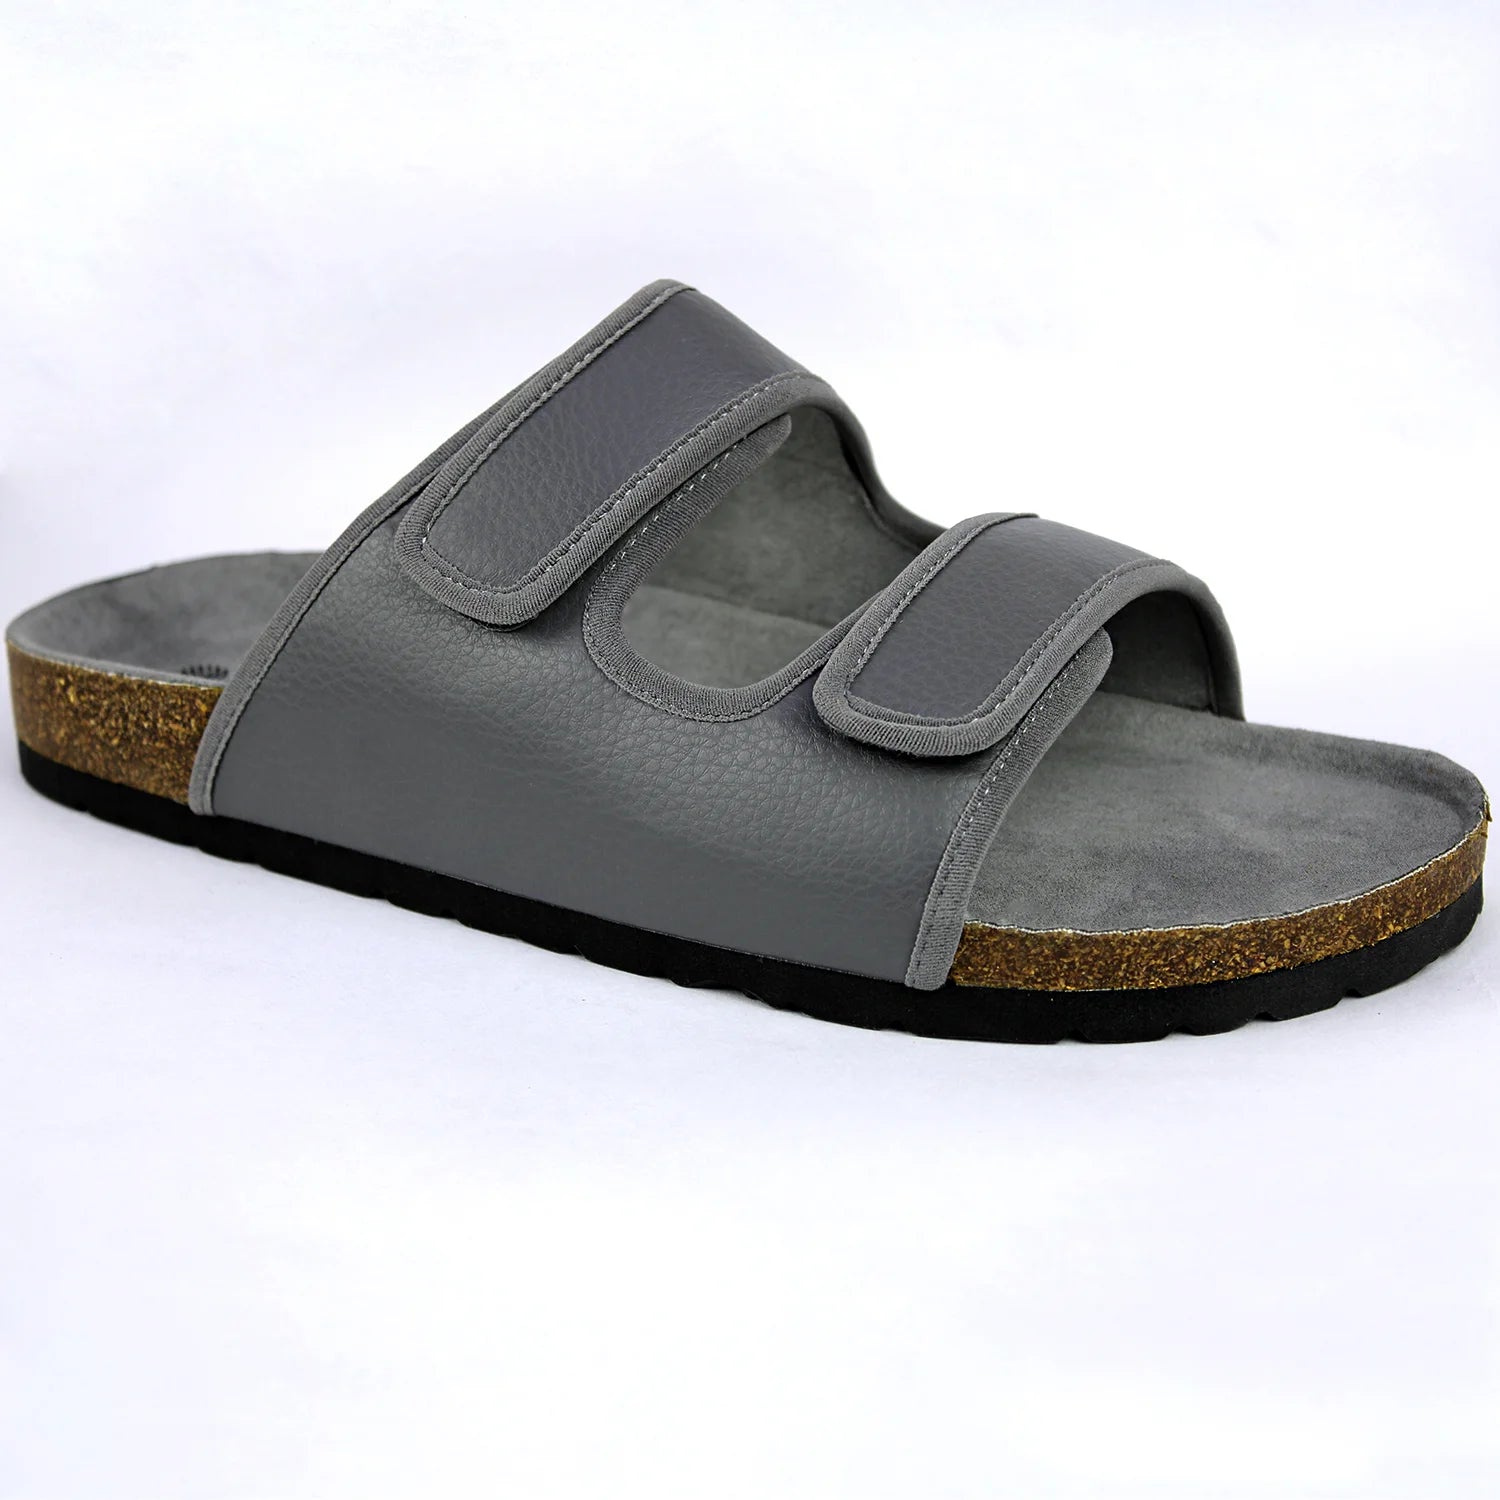 Footwear on-sale Cloudy Grey cork sandals for men, combining affordability with style and comfort